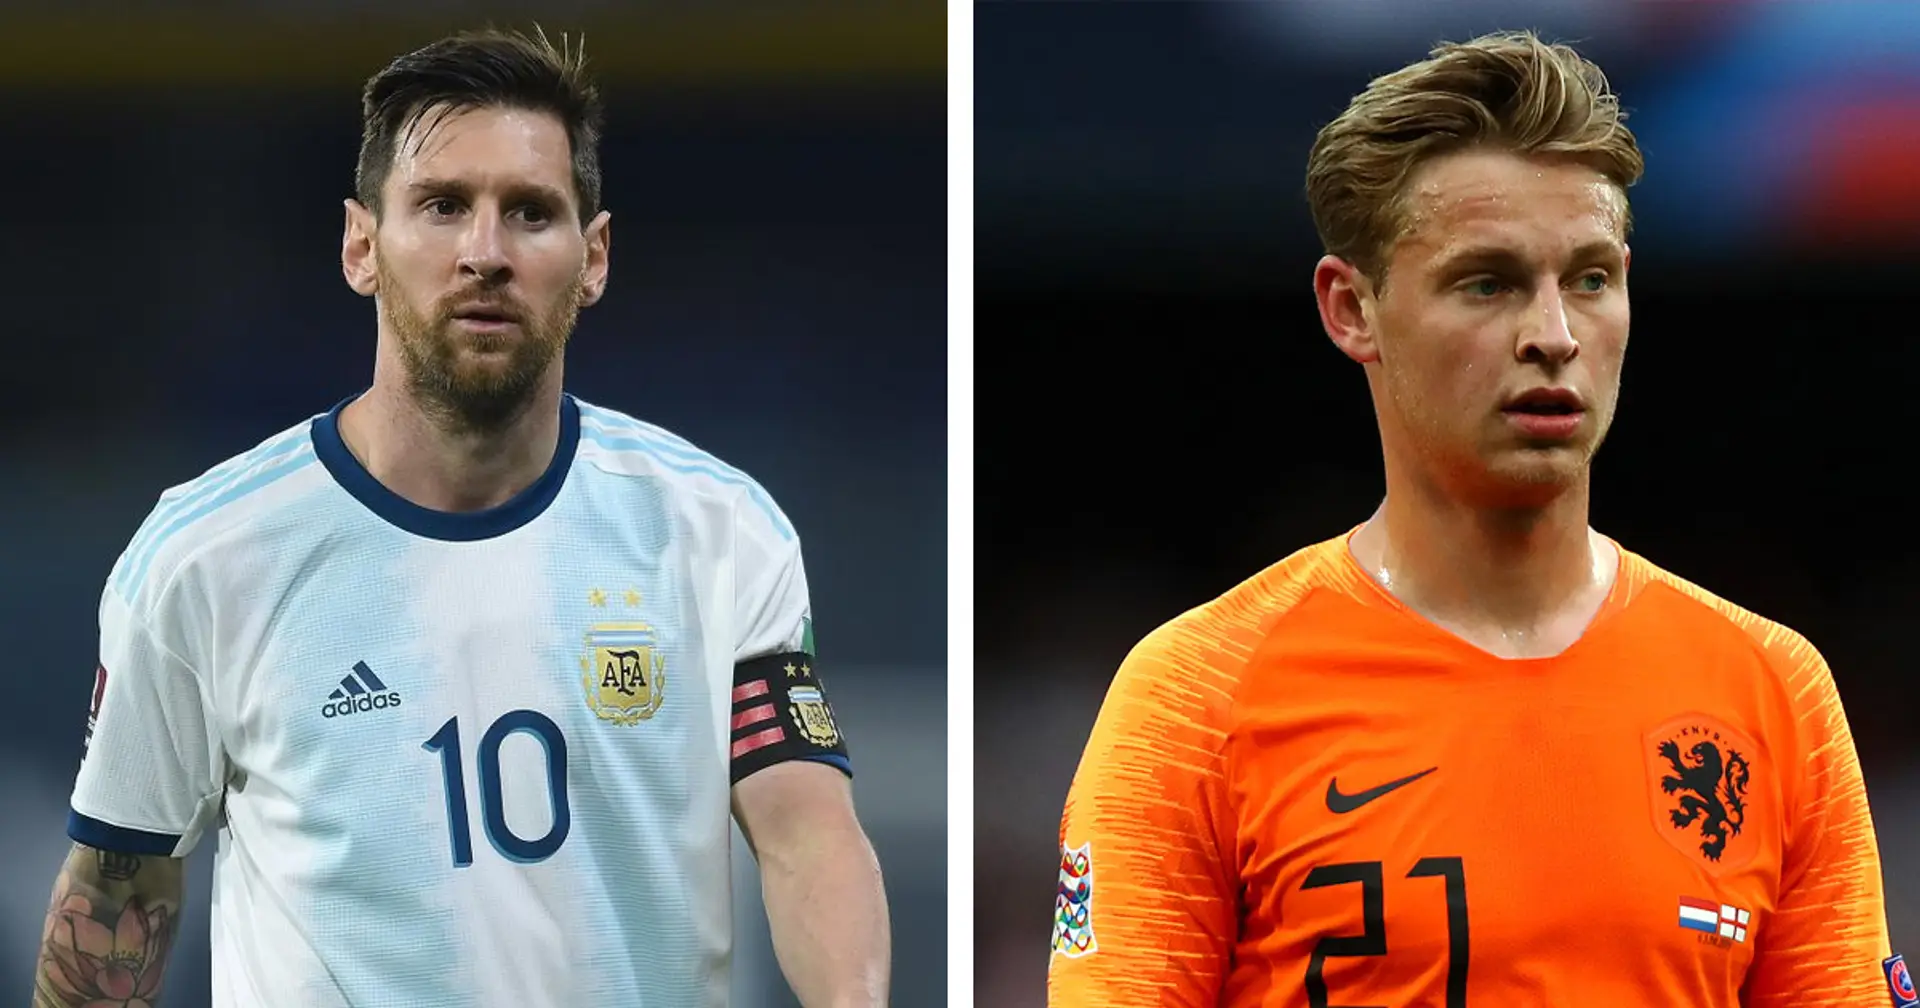 Messi and De Jong called up for national team duty, 5 matches to look forward to